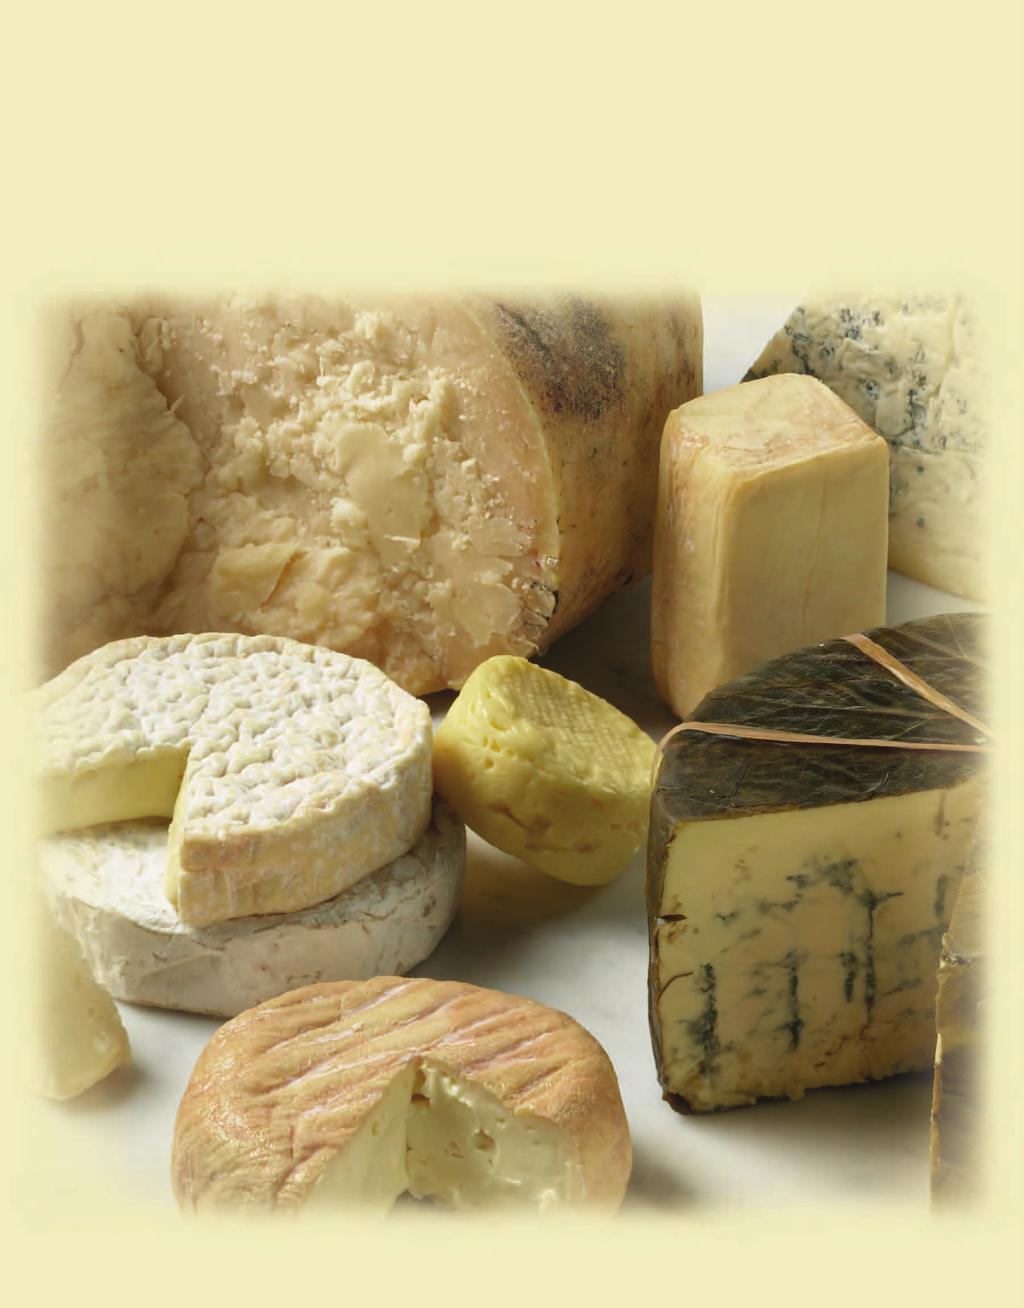 U.S. SPECIALTY CHEESES An